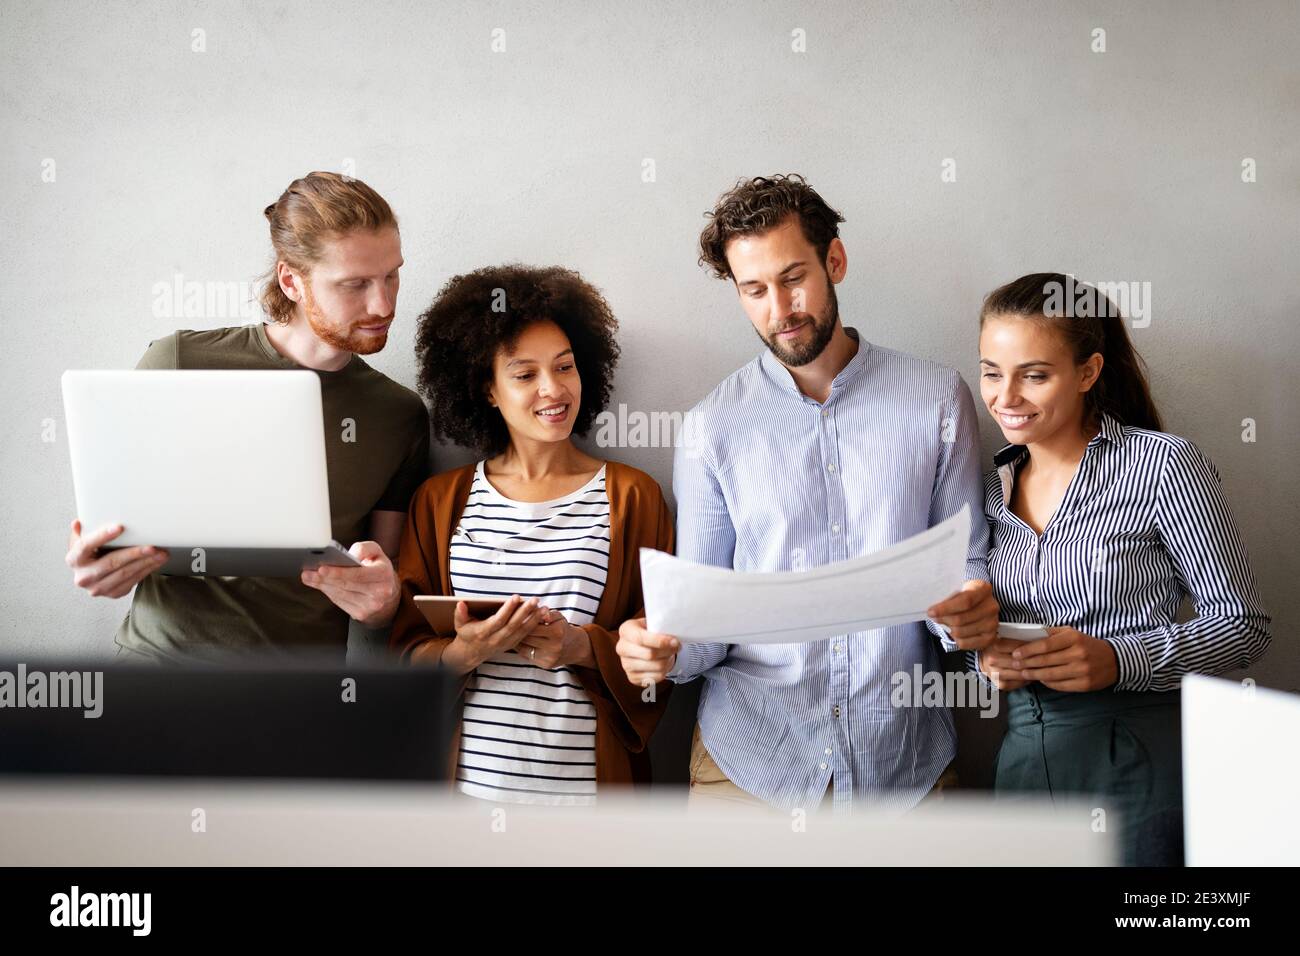 Business People Good Teamwork In Office Teamwork Successful Meeting Workplace Concept Stock Photo Alamy